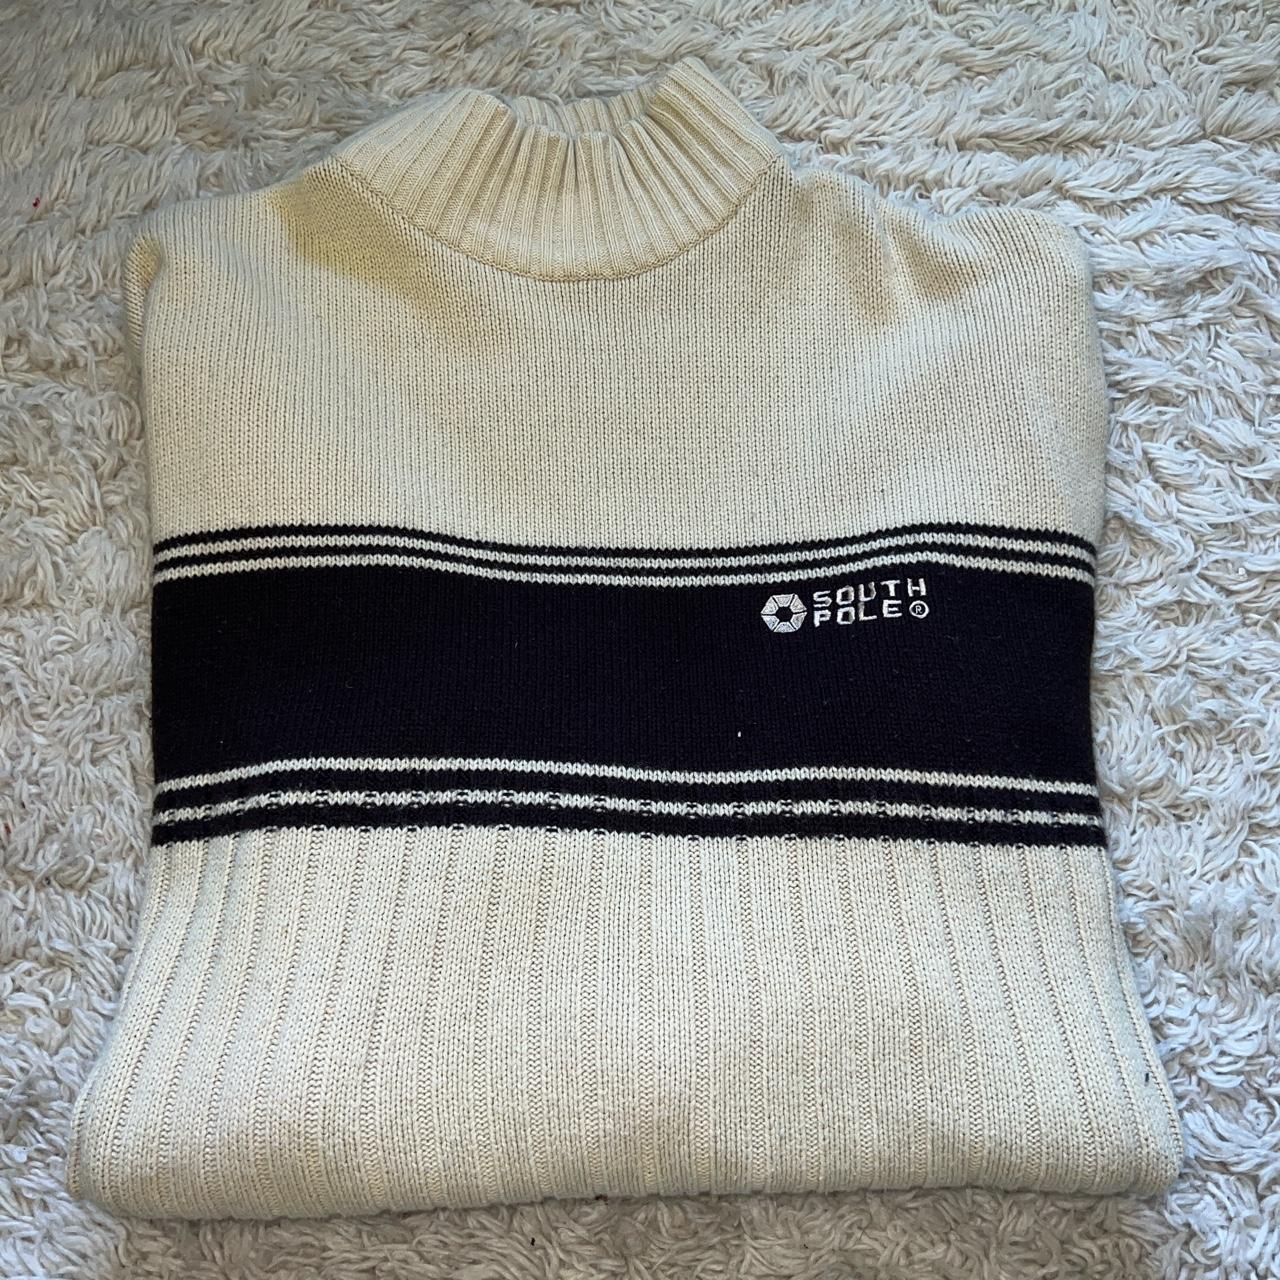 South Pole turtle neck sweater 🕊️ This would be the... - Depop